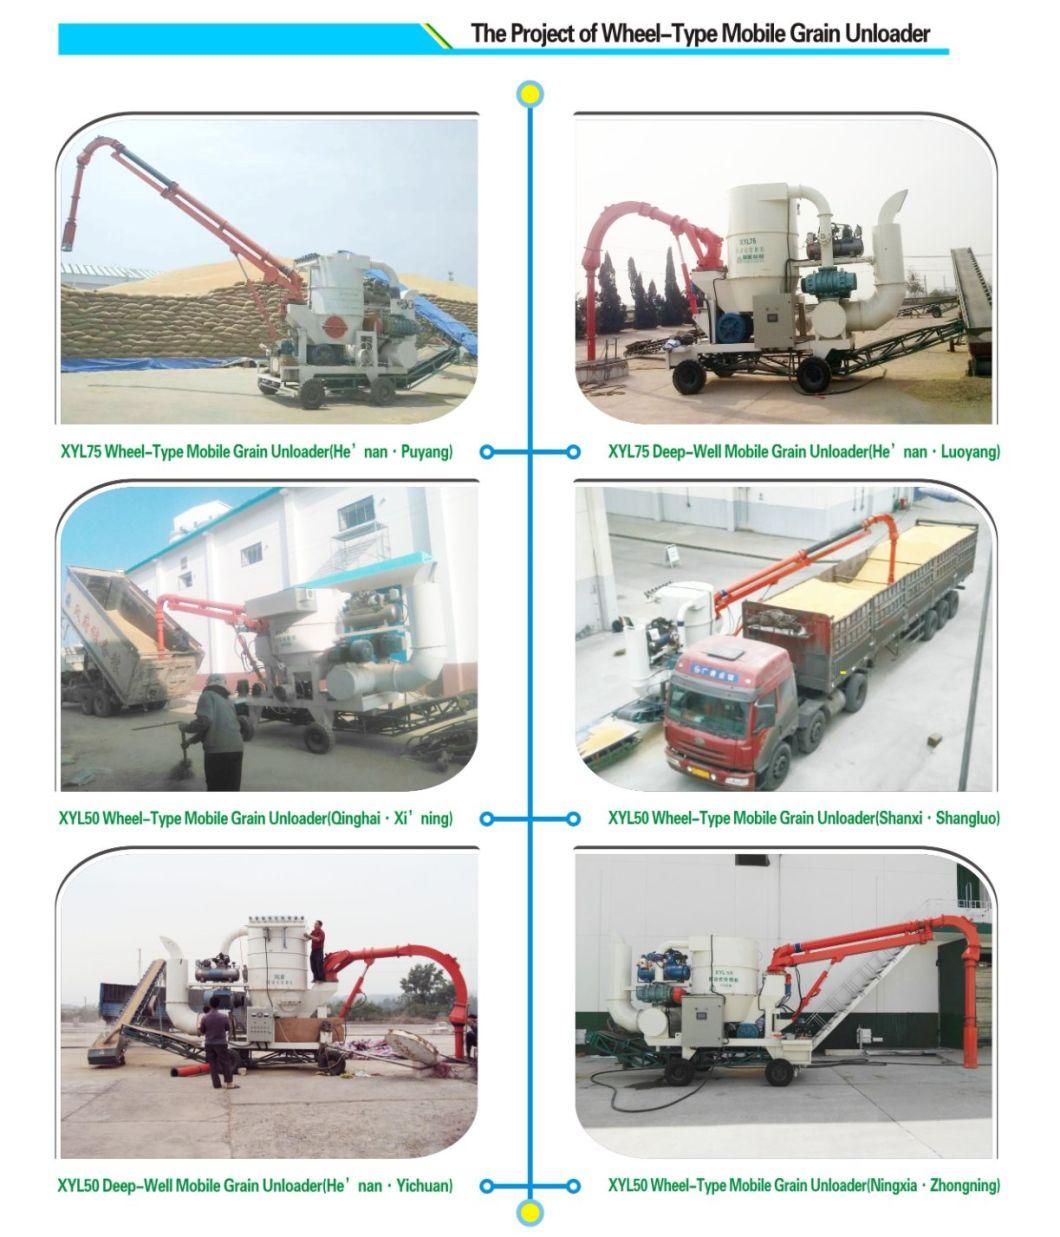 Standard Exportation Packing Carbon Steel Bucket Elevator Grain Unloader Loading Grain From Wagon to Wagon or Truck